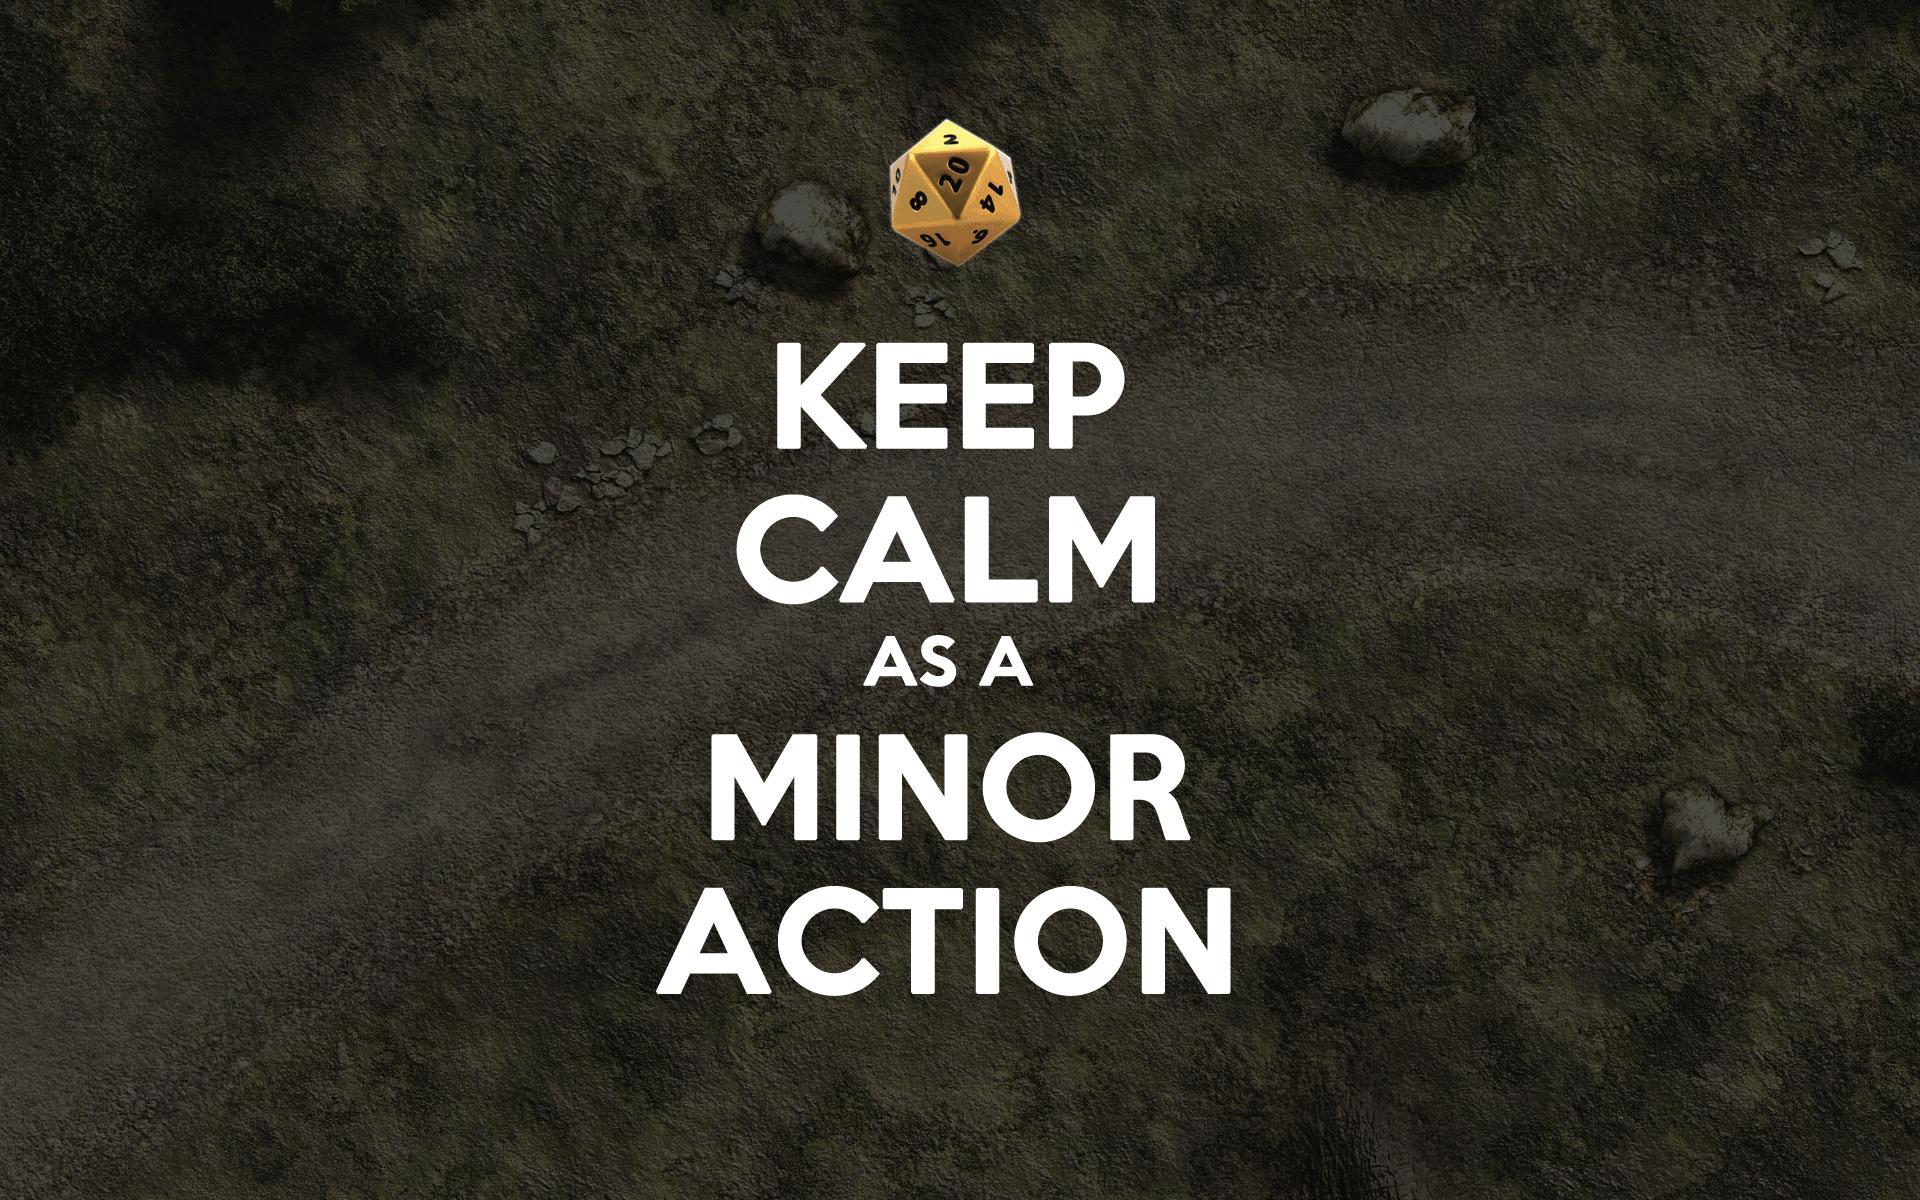 Wallpaper: Keep Calm. Just sharing my wallpapers with some D&D lovers